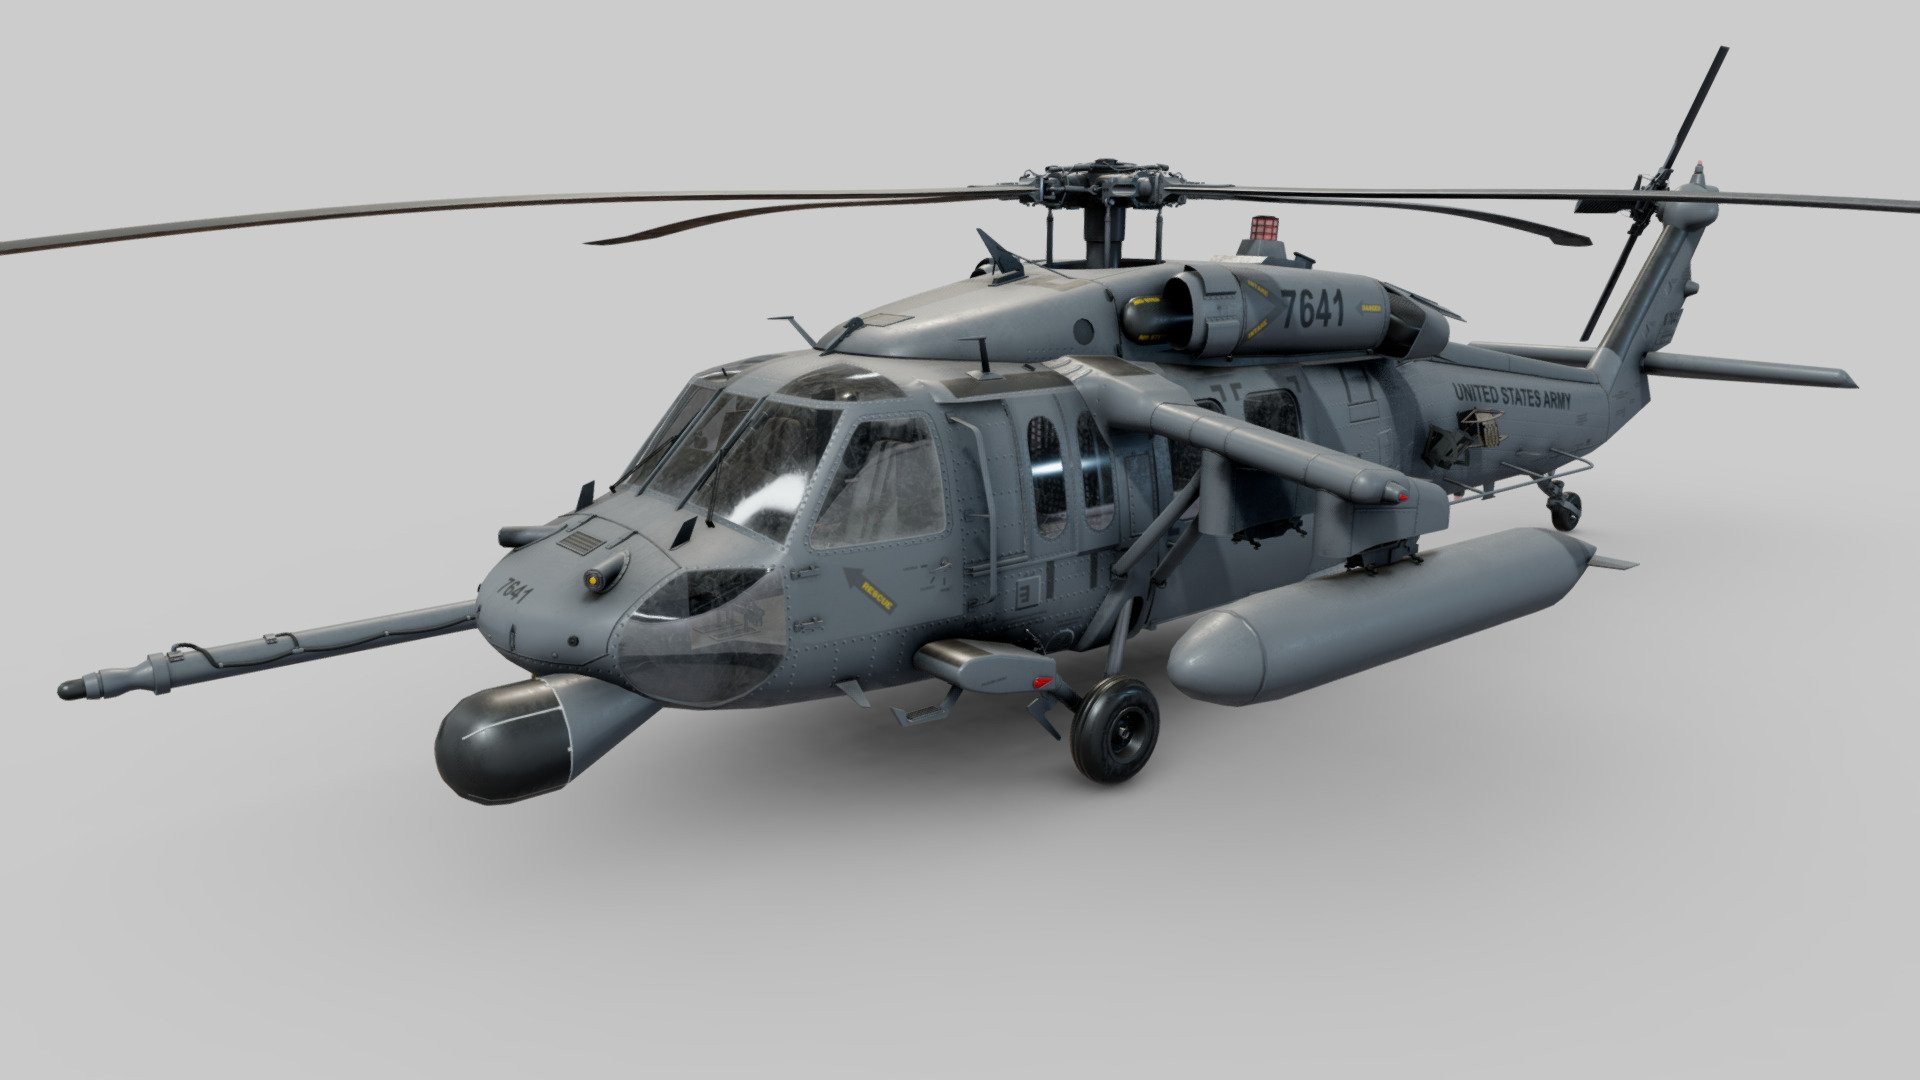 UH-60 BLACKHAWK Helicopter 3D Model

KEY FEATURES




3D Modeled Interior and Cockpit: Complete interior and cockpit modeled in 3D.

Interactive Components: 3D modeled indicators and separate objects with functional switches and instruments.

Organized Workflow and Files: File structure organized for ease of use.

TEXTURES:




PBR Textures: Created using Substance Painter.

Material Maps: Base Color, Roughness, Metallic, Normal, Emission, Occlusion.

Texture Resolution: 4K resolution textures.

Emission Maps Included: Enhances illuminated components.

Fully UV Unwrapped: Ensures proper application of textures.

TECHNICAL SPECIFICATIONS

Polycount:




Objects: 169

Vertices: 273,479

Edges: 535,561

Faces: 267,796

Triangles: 474,878

21 LIVERIES/SKINS INCLUDED

 - Sikorsky HH-60 Pave Hawk - Buy Royalty Free 3D model by luisbcompany 3d model